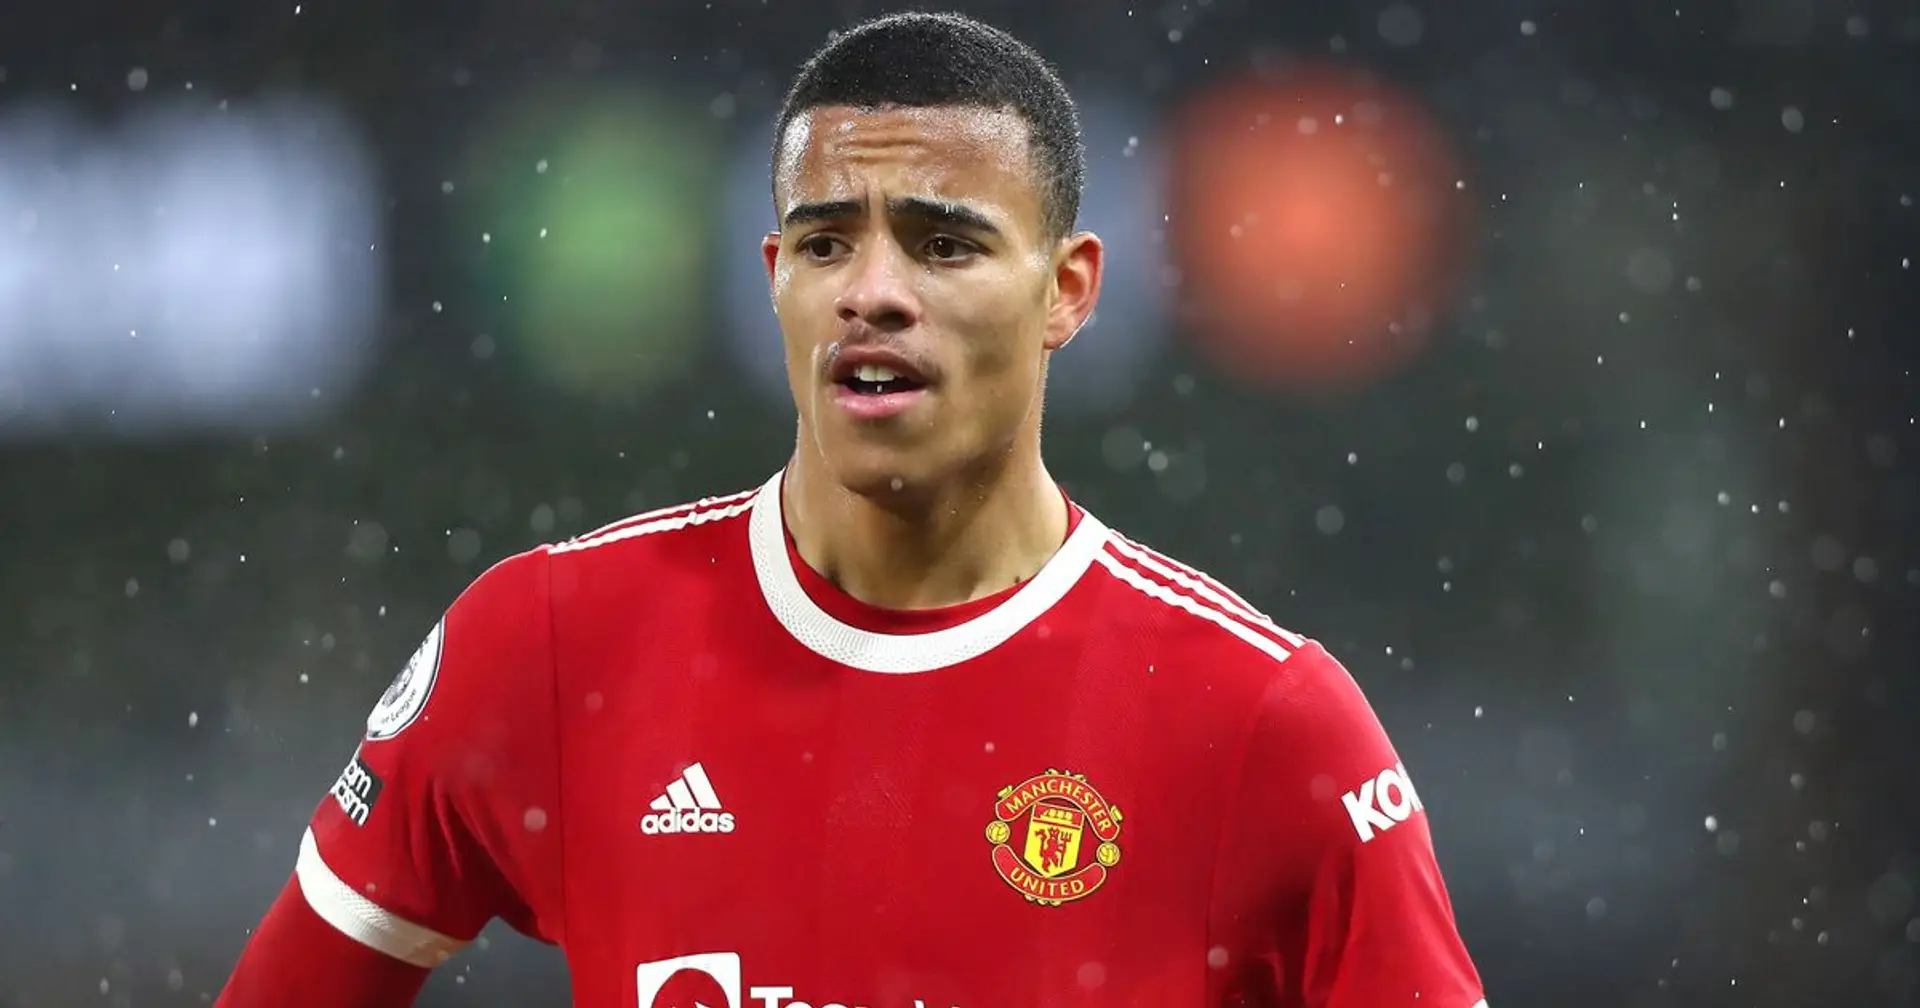 BREAKING: Mason Greenwood released on bail after rape and assault arrest